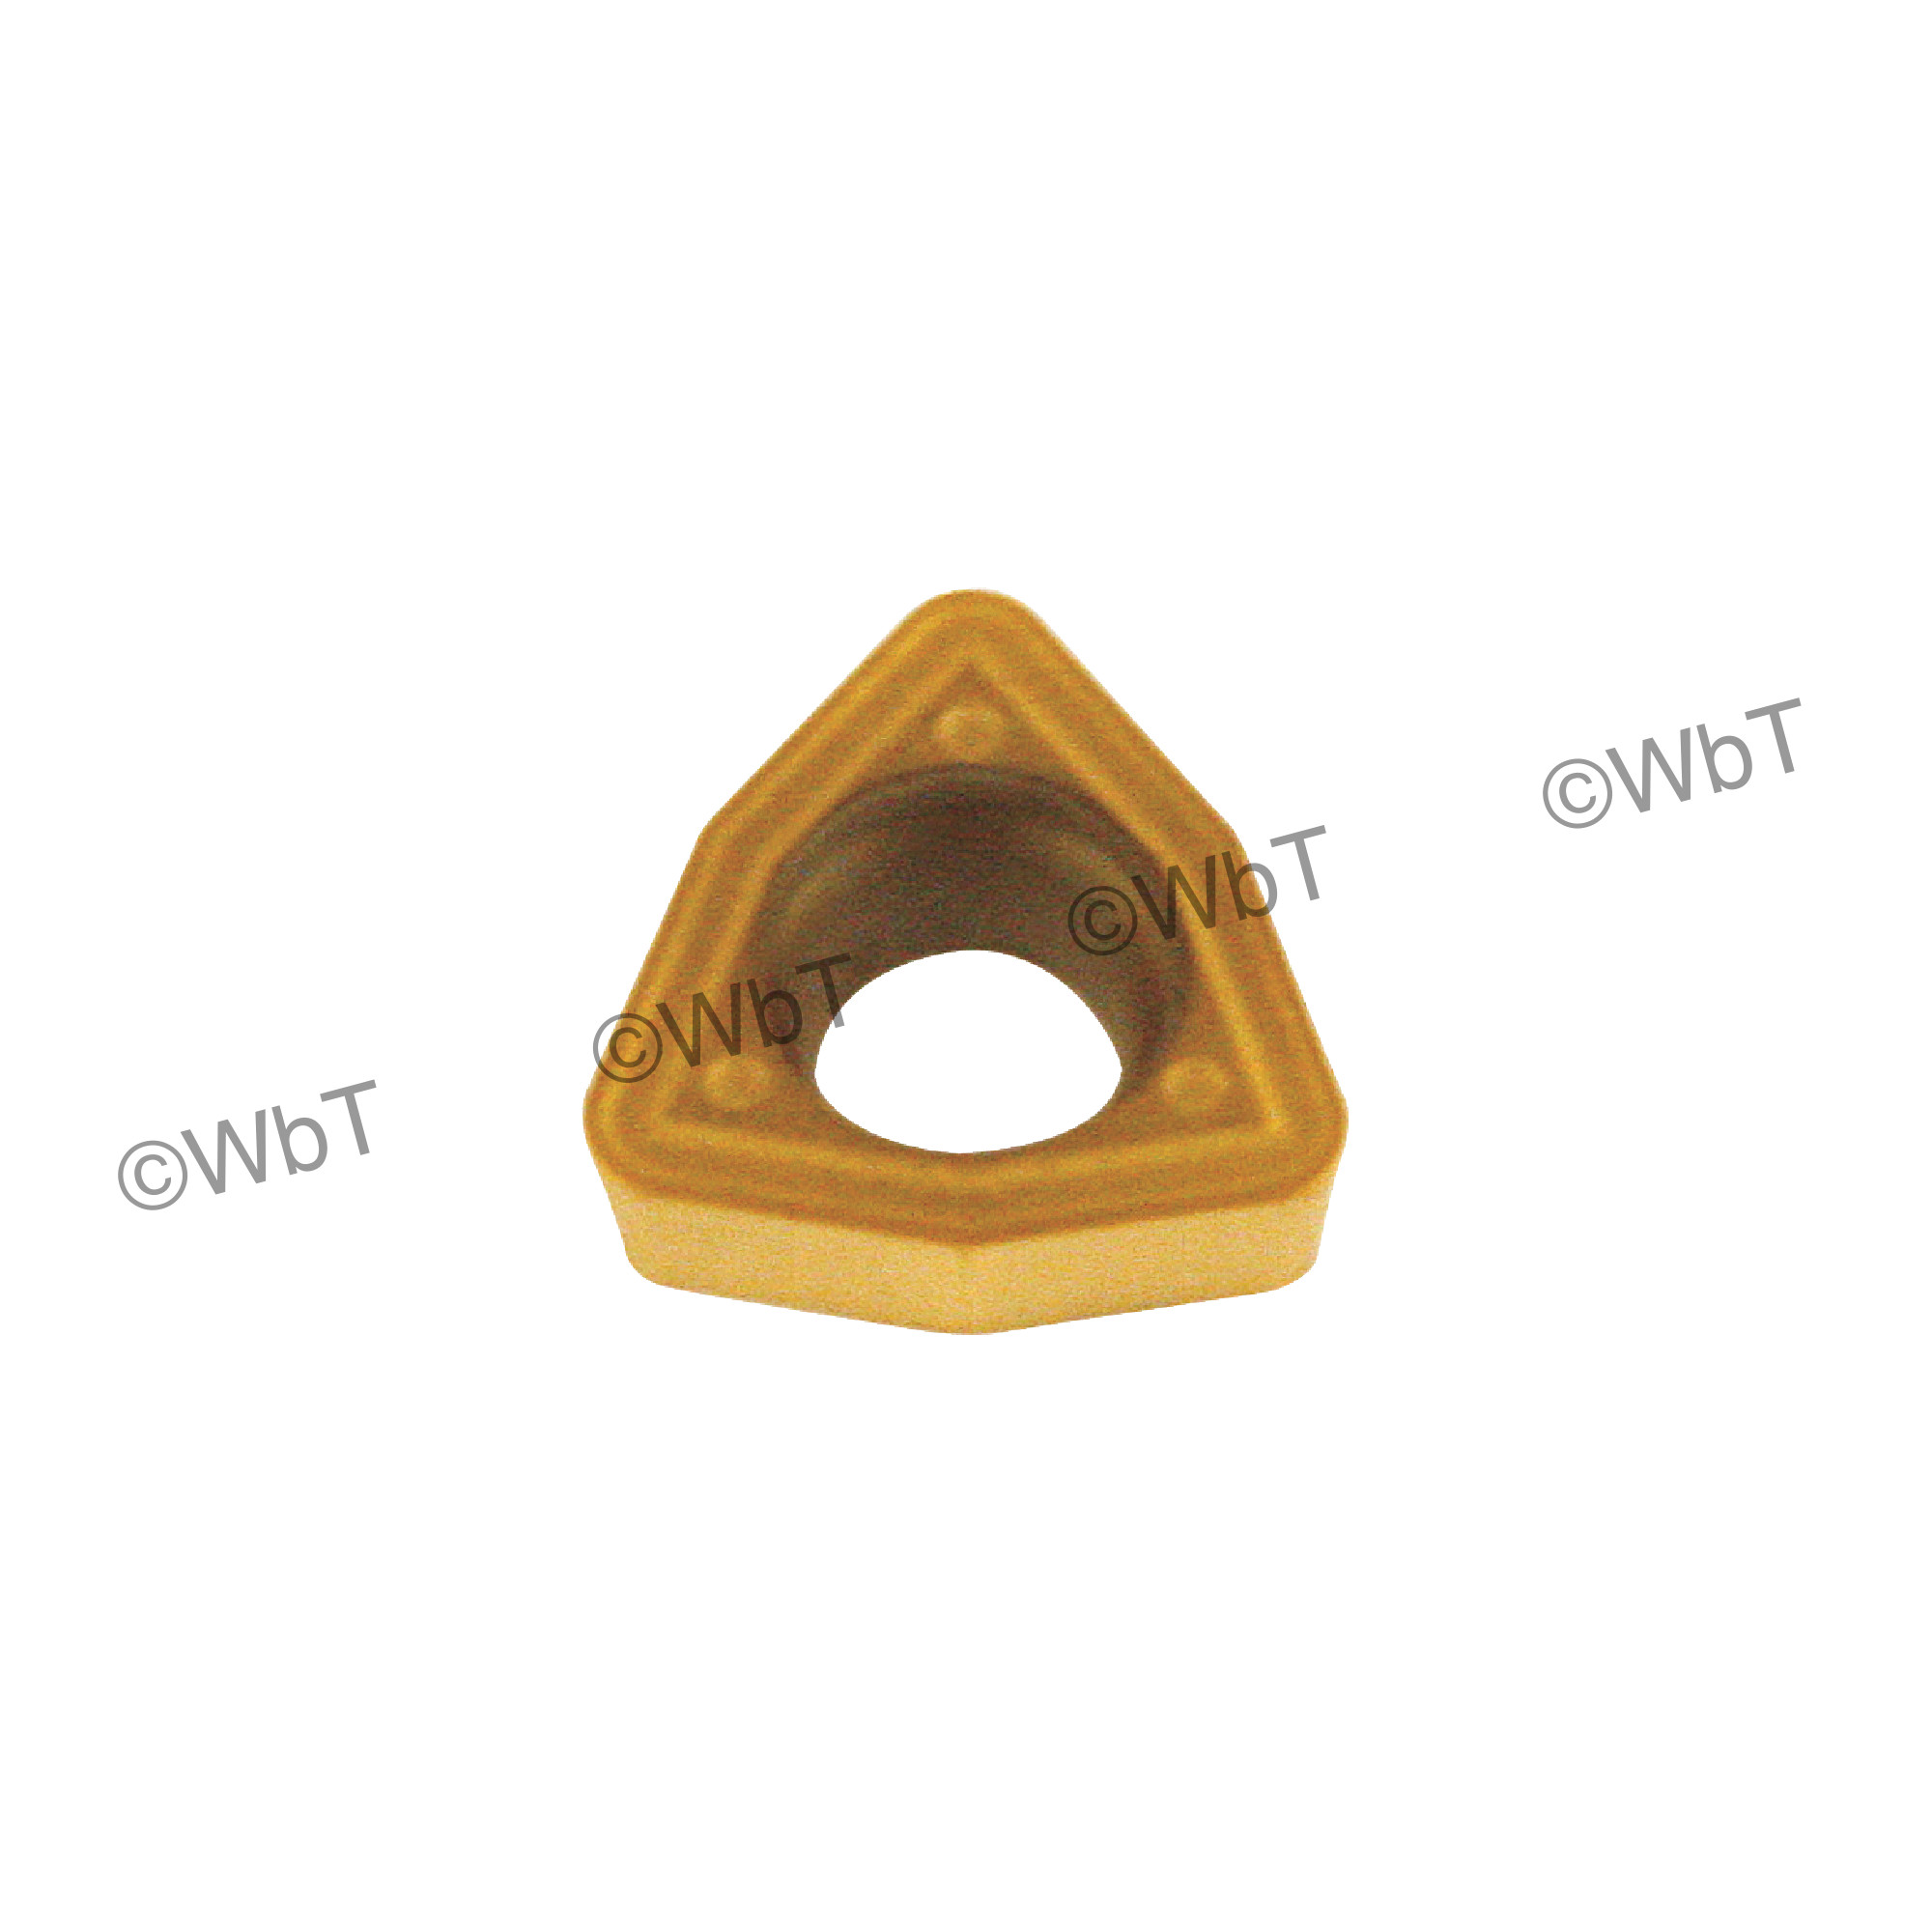 ULTRA-DEX - WCMX1.8(1.5)2 UD51 INDEXABLE DRILLING INSERT